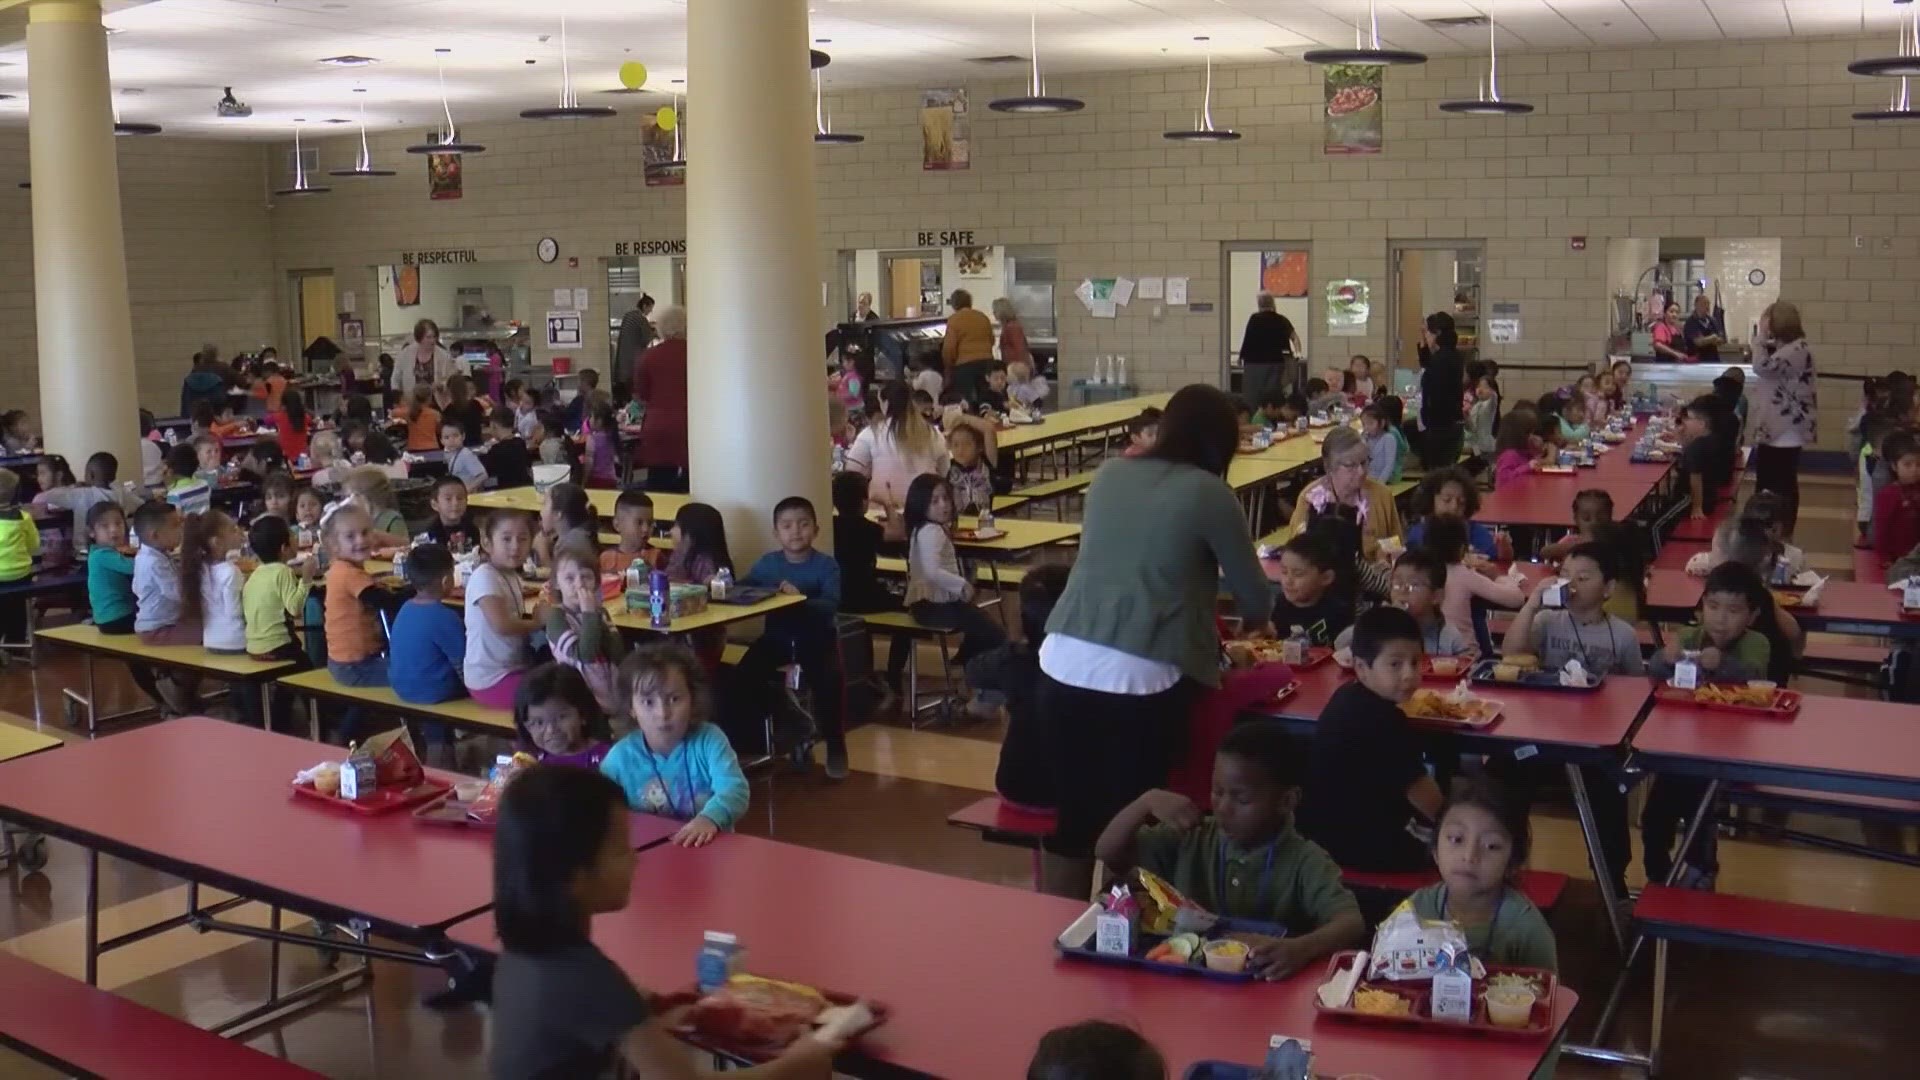 1.4 million is going to schools that currently offer free breakfast. They hope to change the stigma around free meals